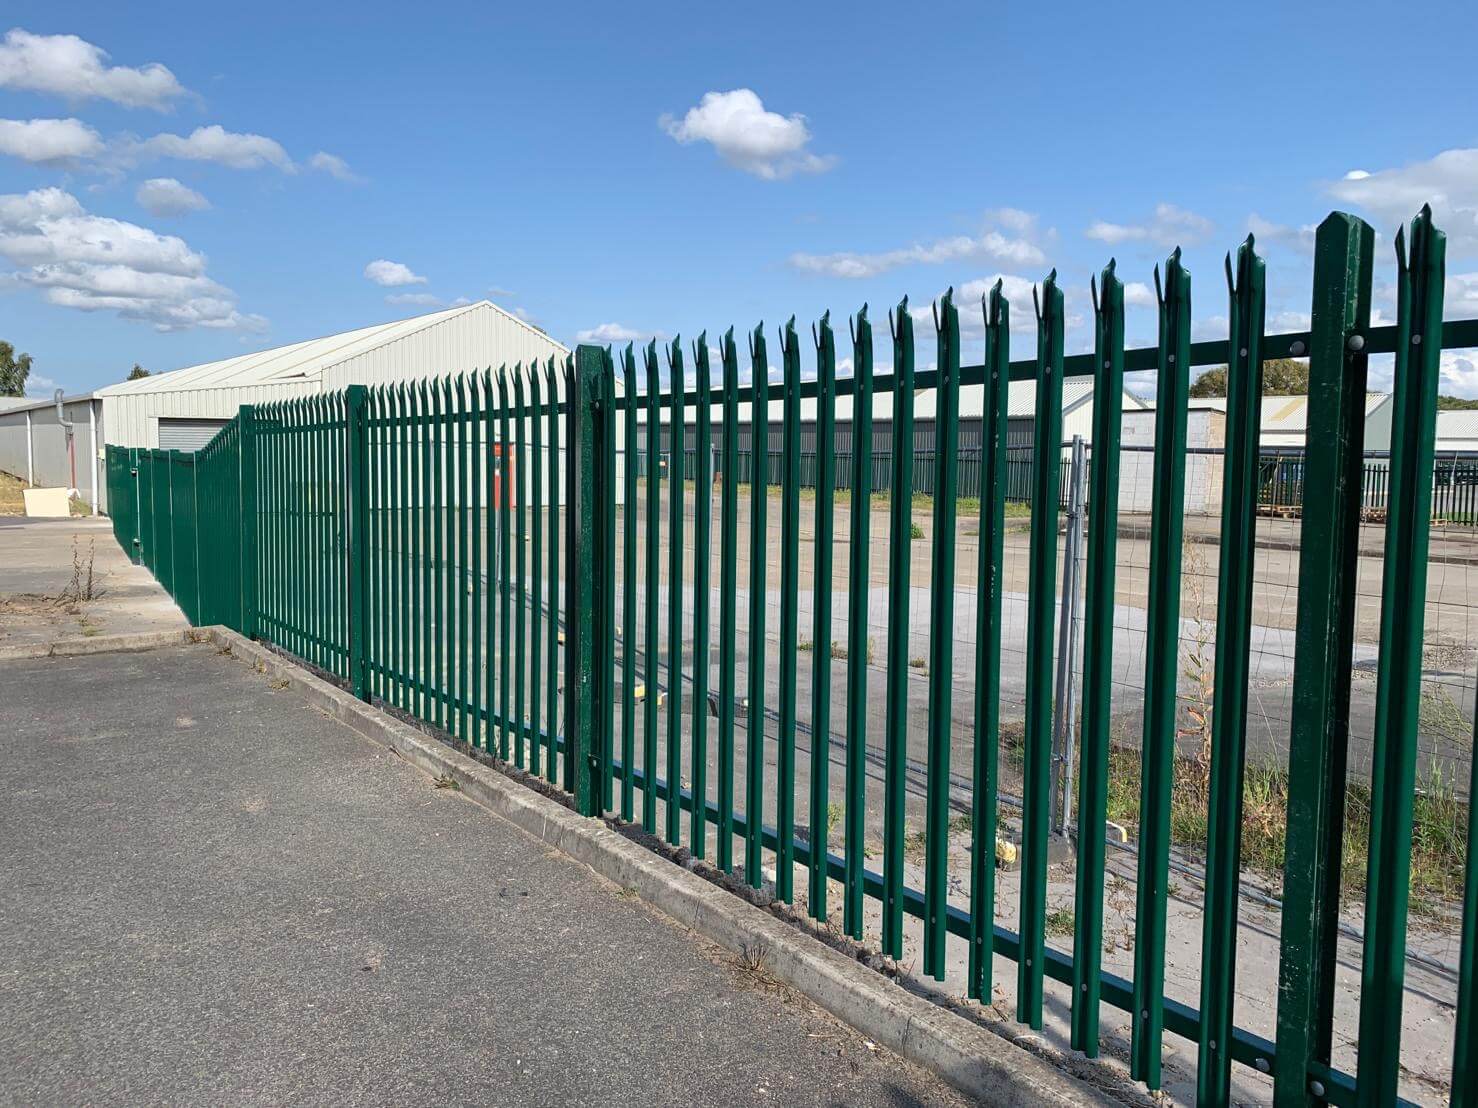 Stylishly Supplementing Your Home with Aluminum Fences